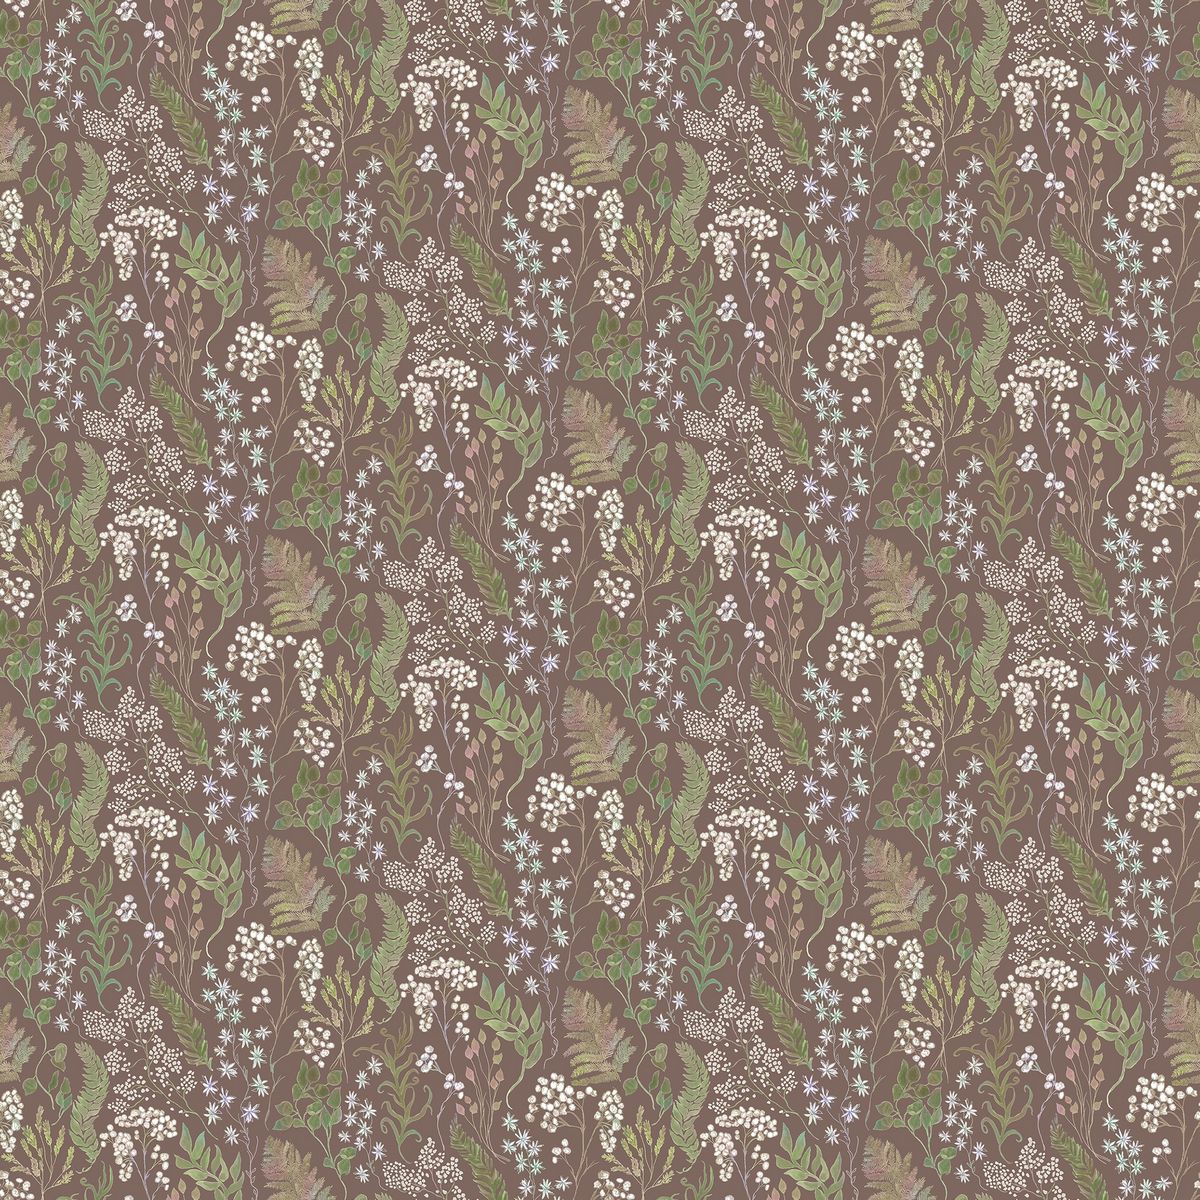 Aileana Sienna Fabric by Voyage Maison